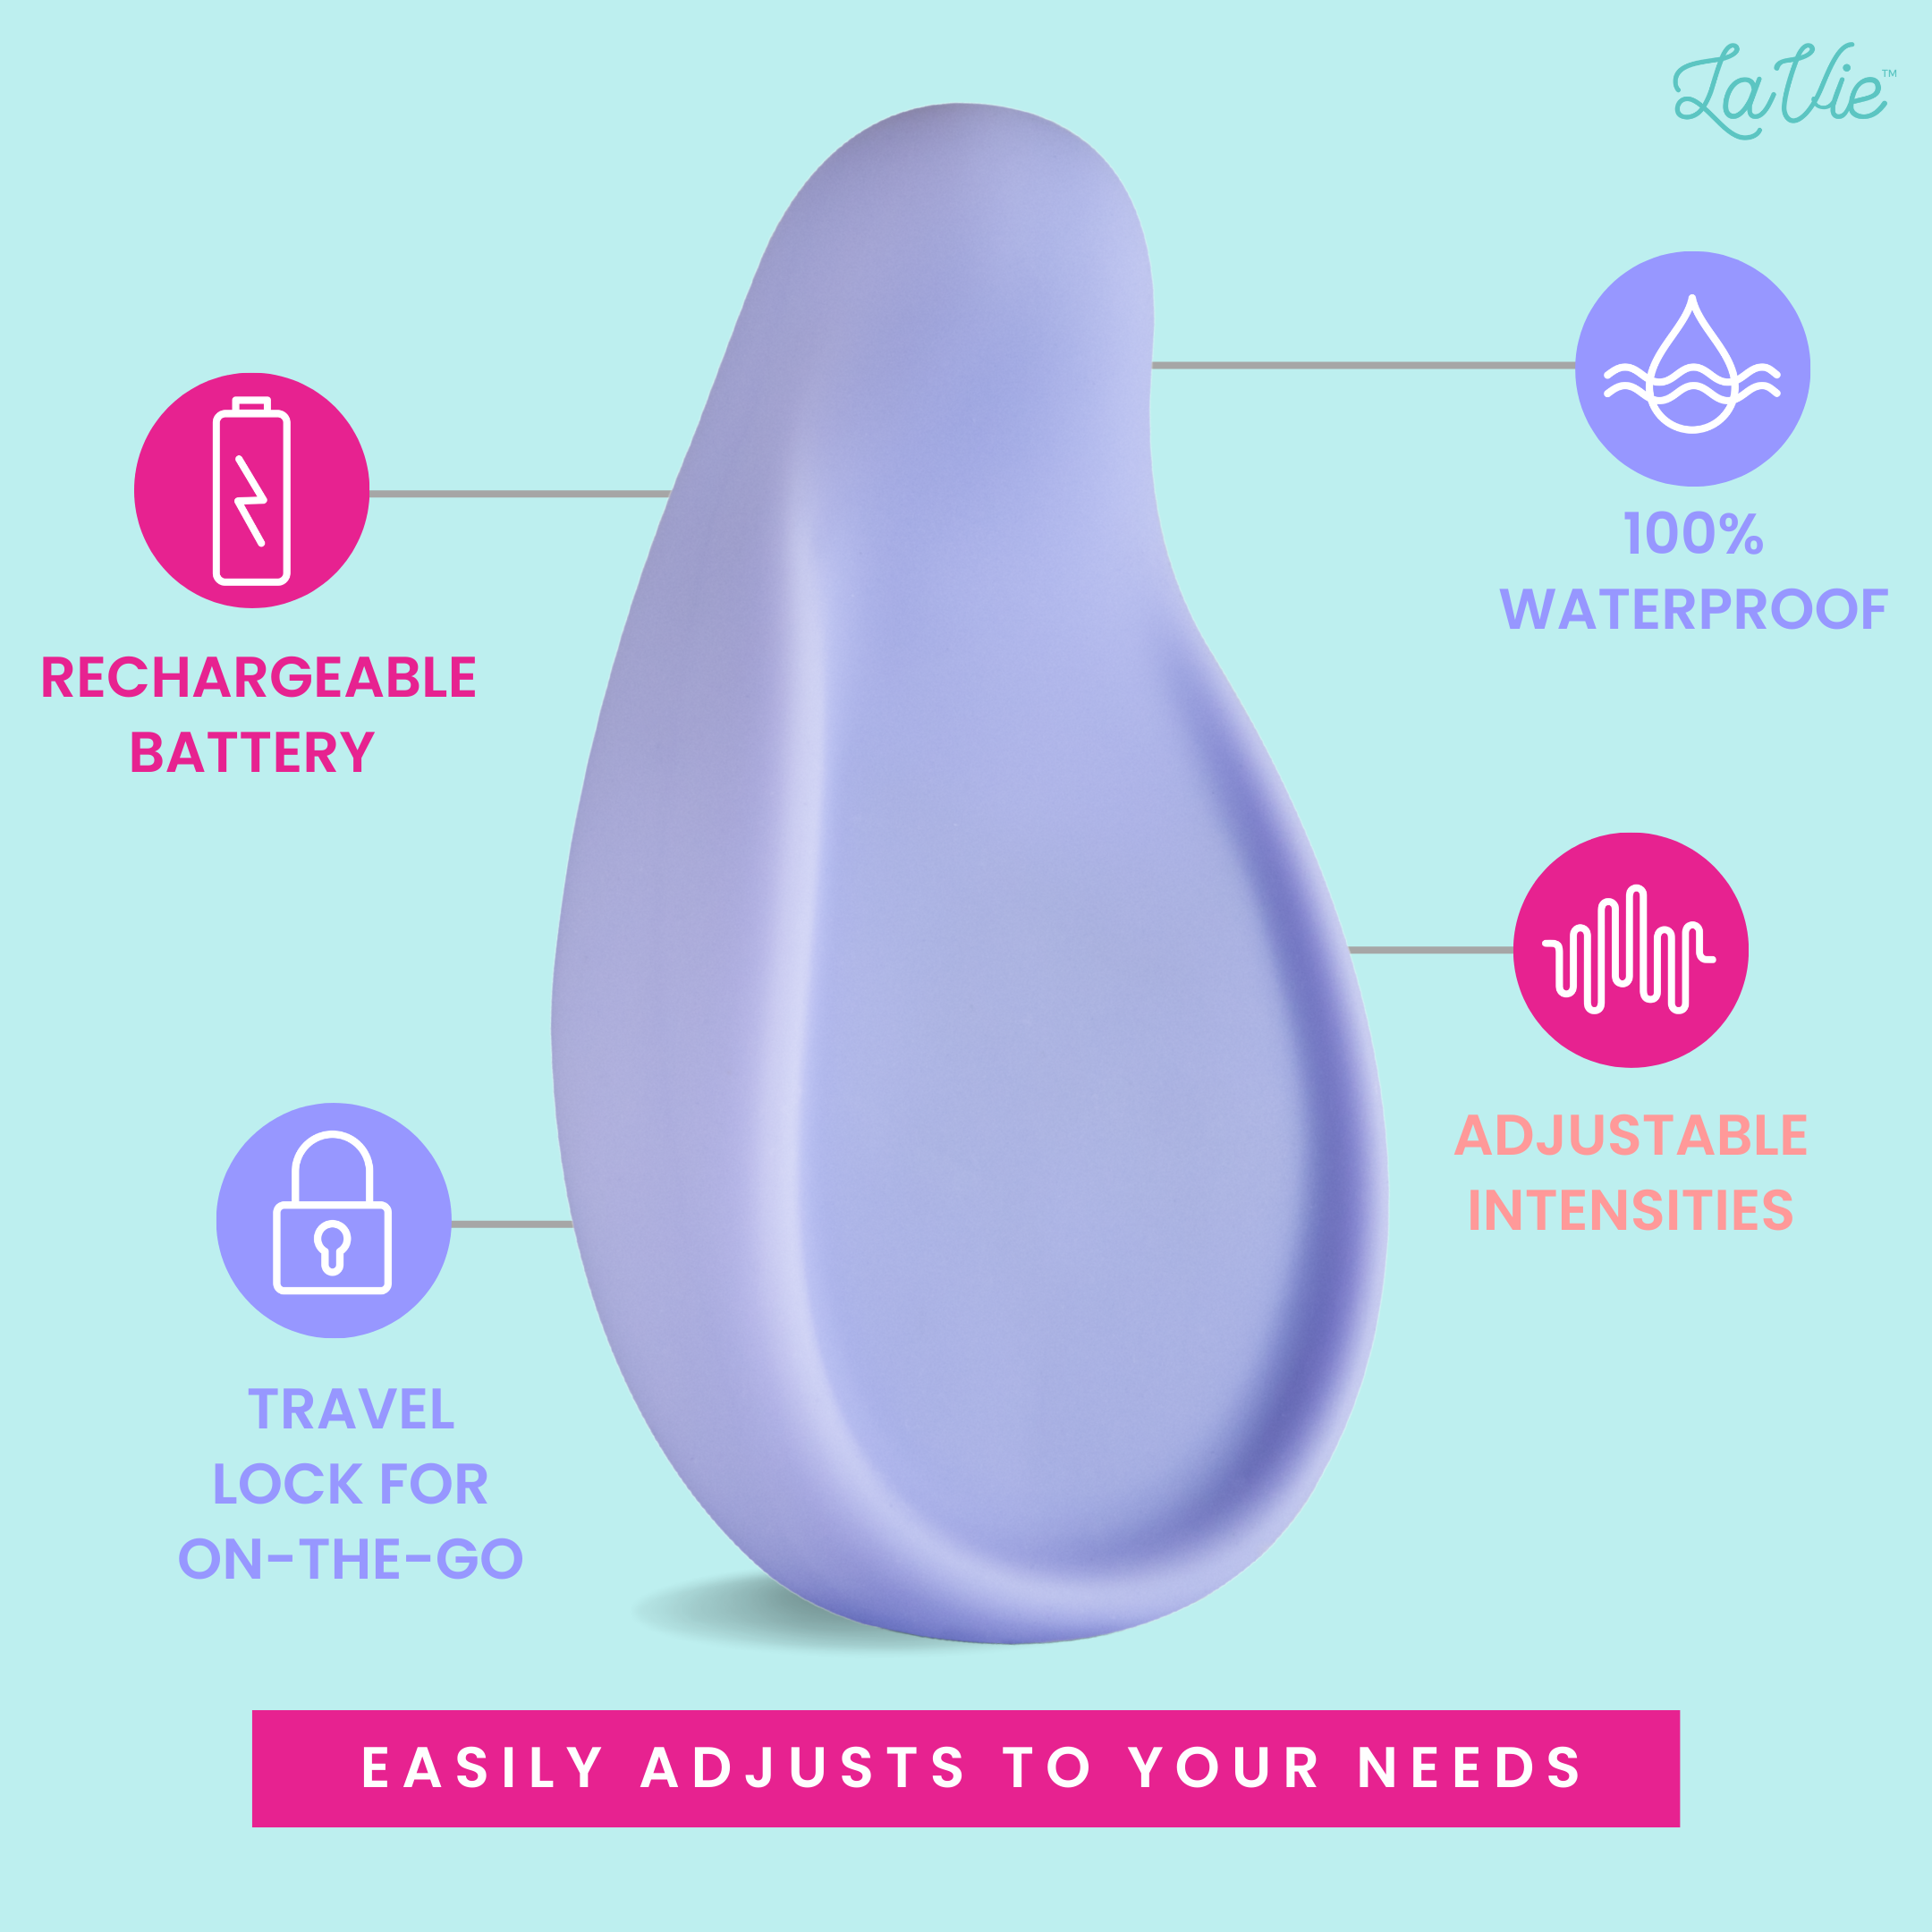 Lactation Massager With 3 Modes Of Heat And 10 Modes Of Vibration